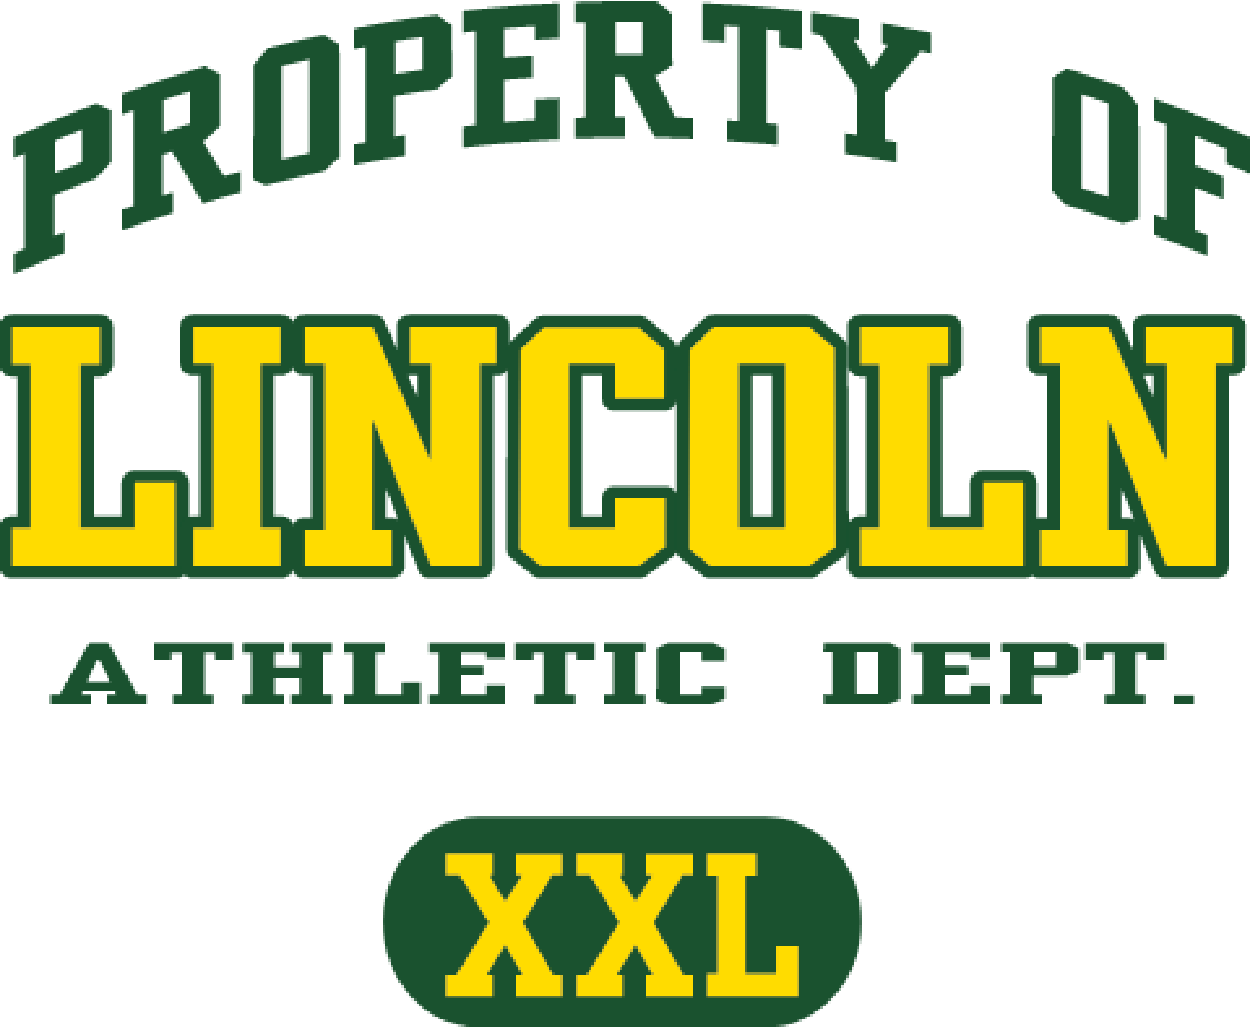 Property of Lincoln Athletic Dept. graphic design template.